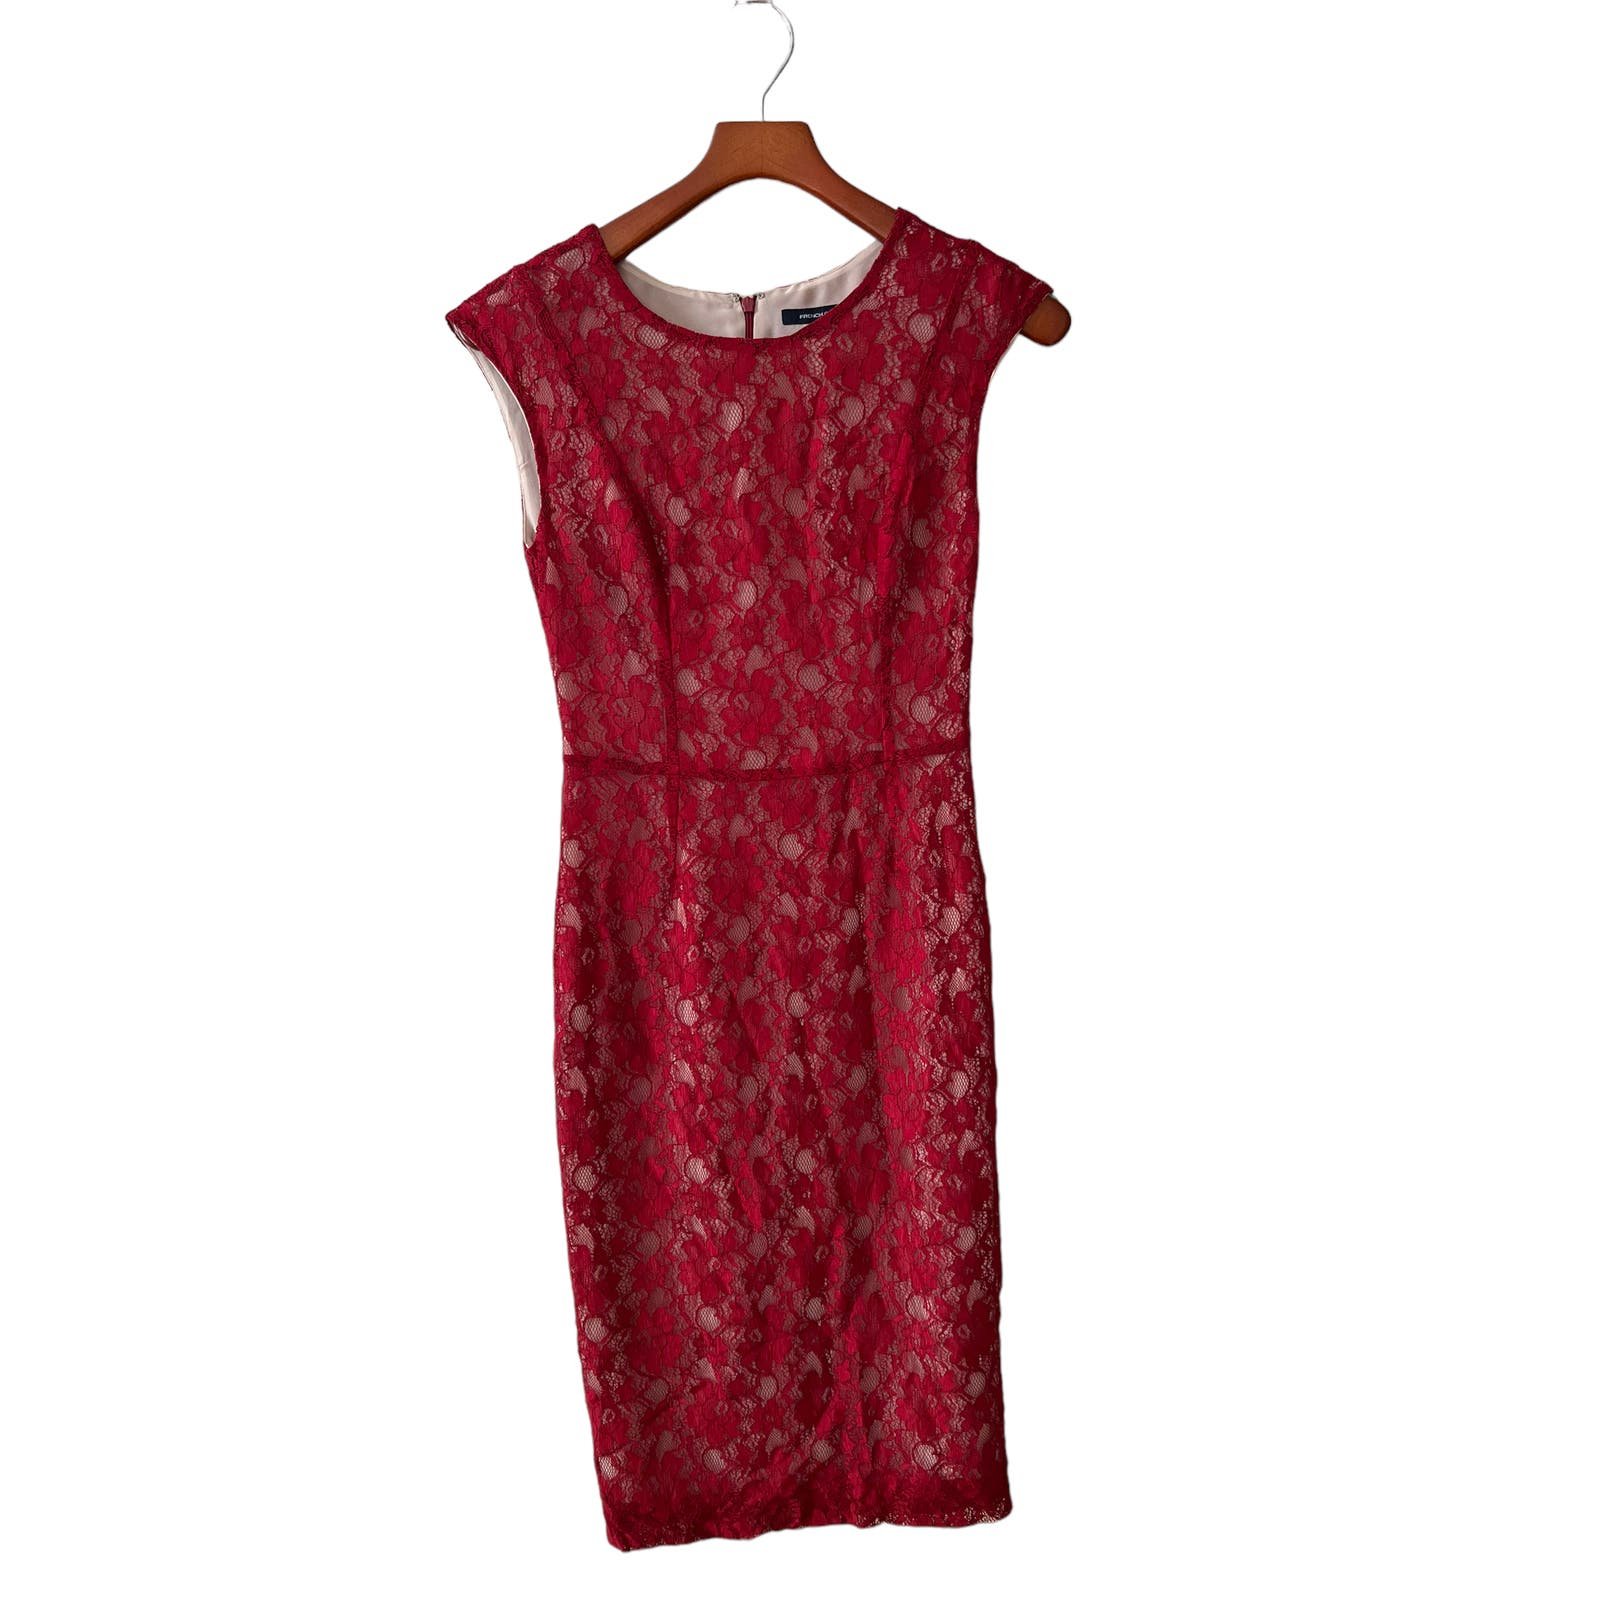 Gorgeous French Connection Red Lace Pencil Dress 2 NGZQryz7u well sale